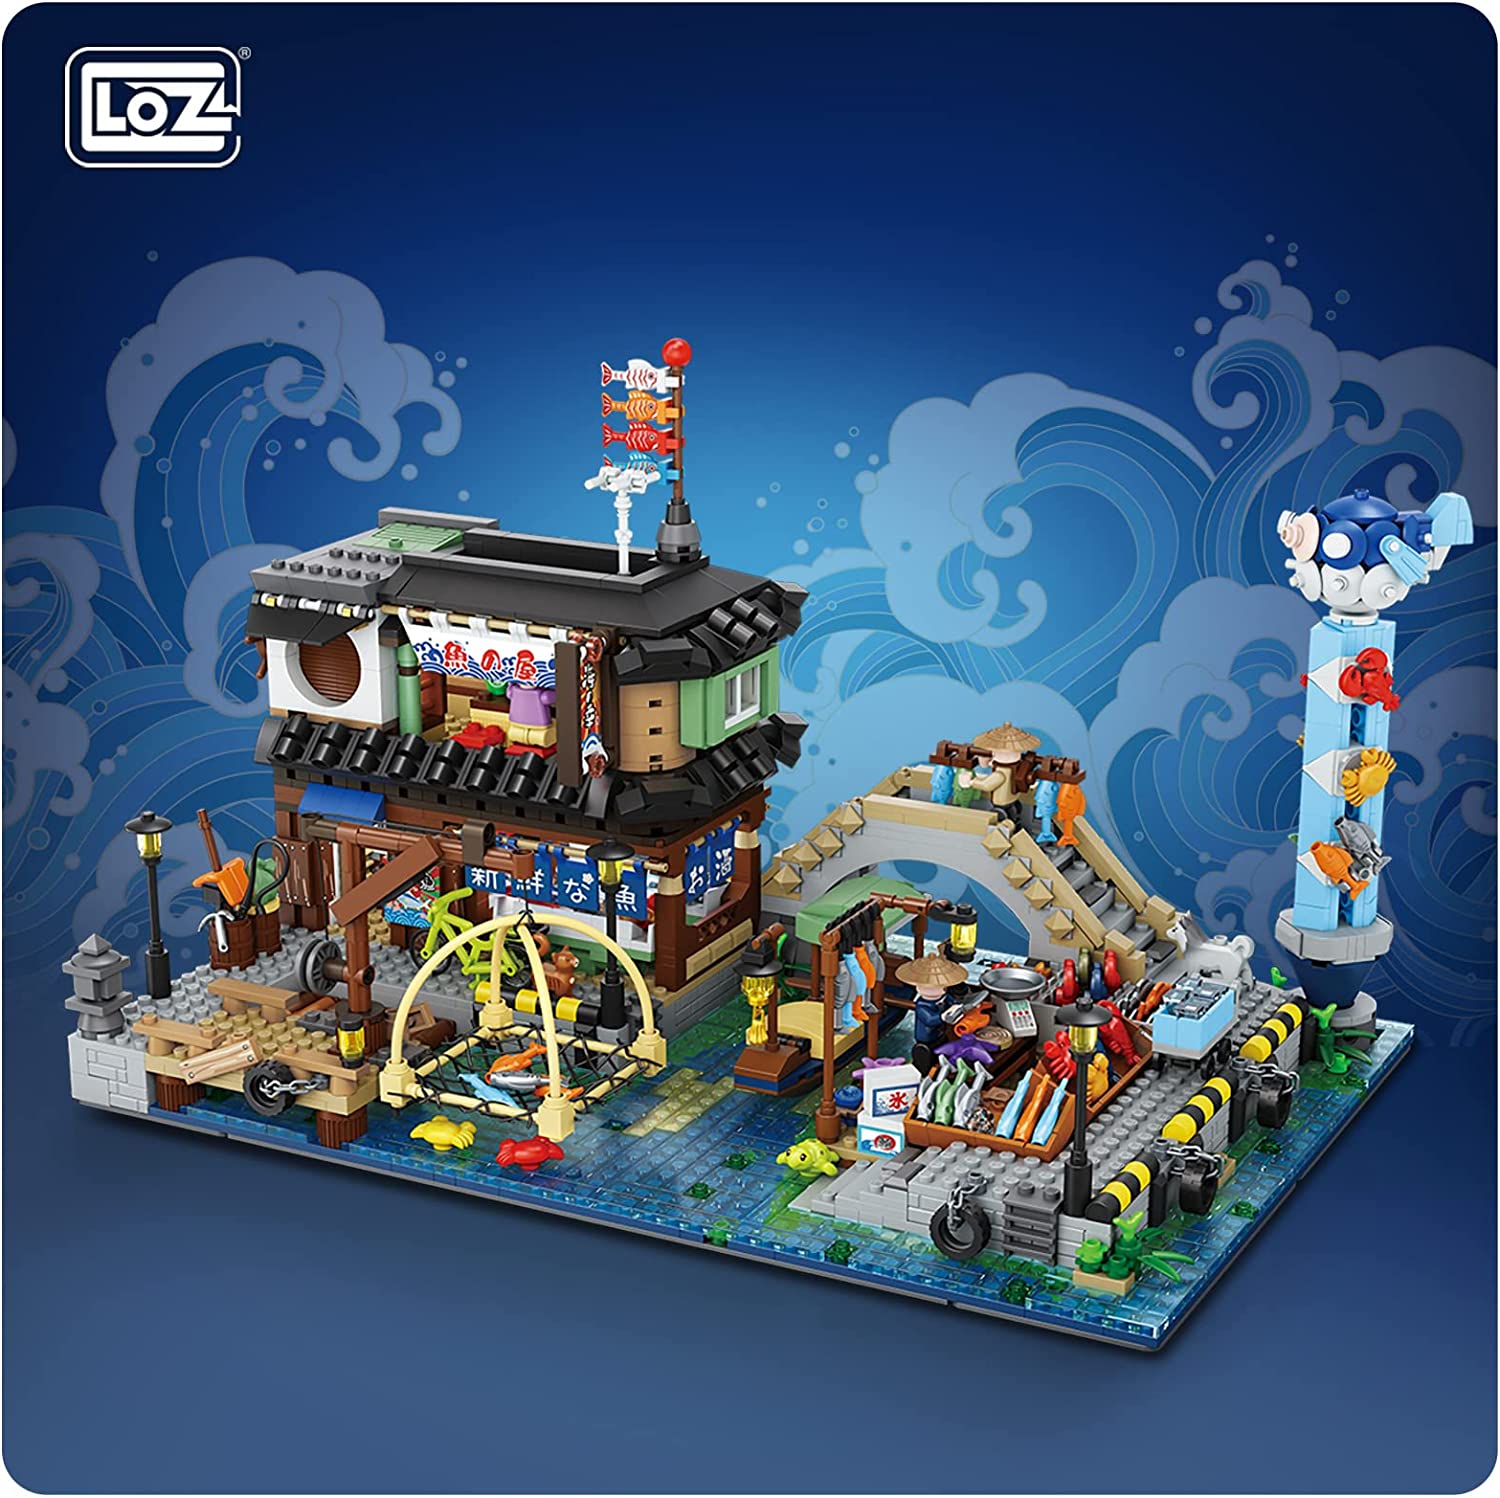 LOZ Japanese Fish Stall Building Blocks Kit for Kids Young People and Couple. Creative Building Blocks (2249 pcs)